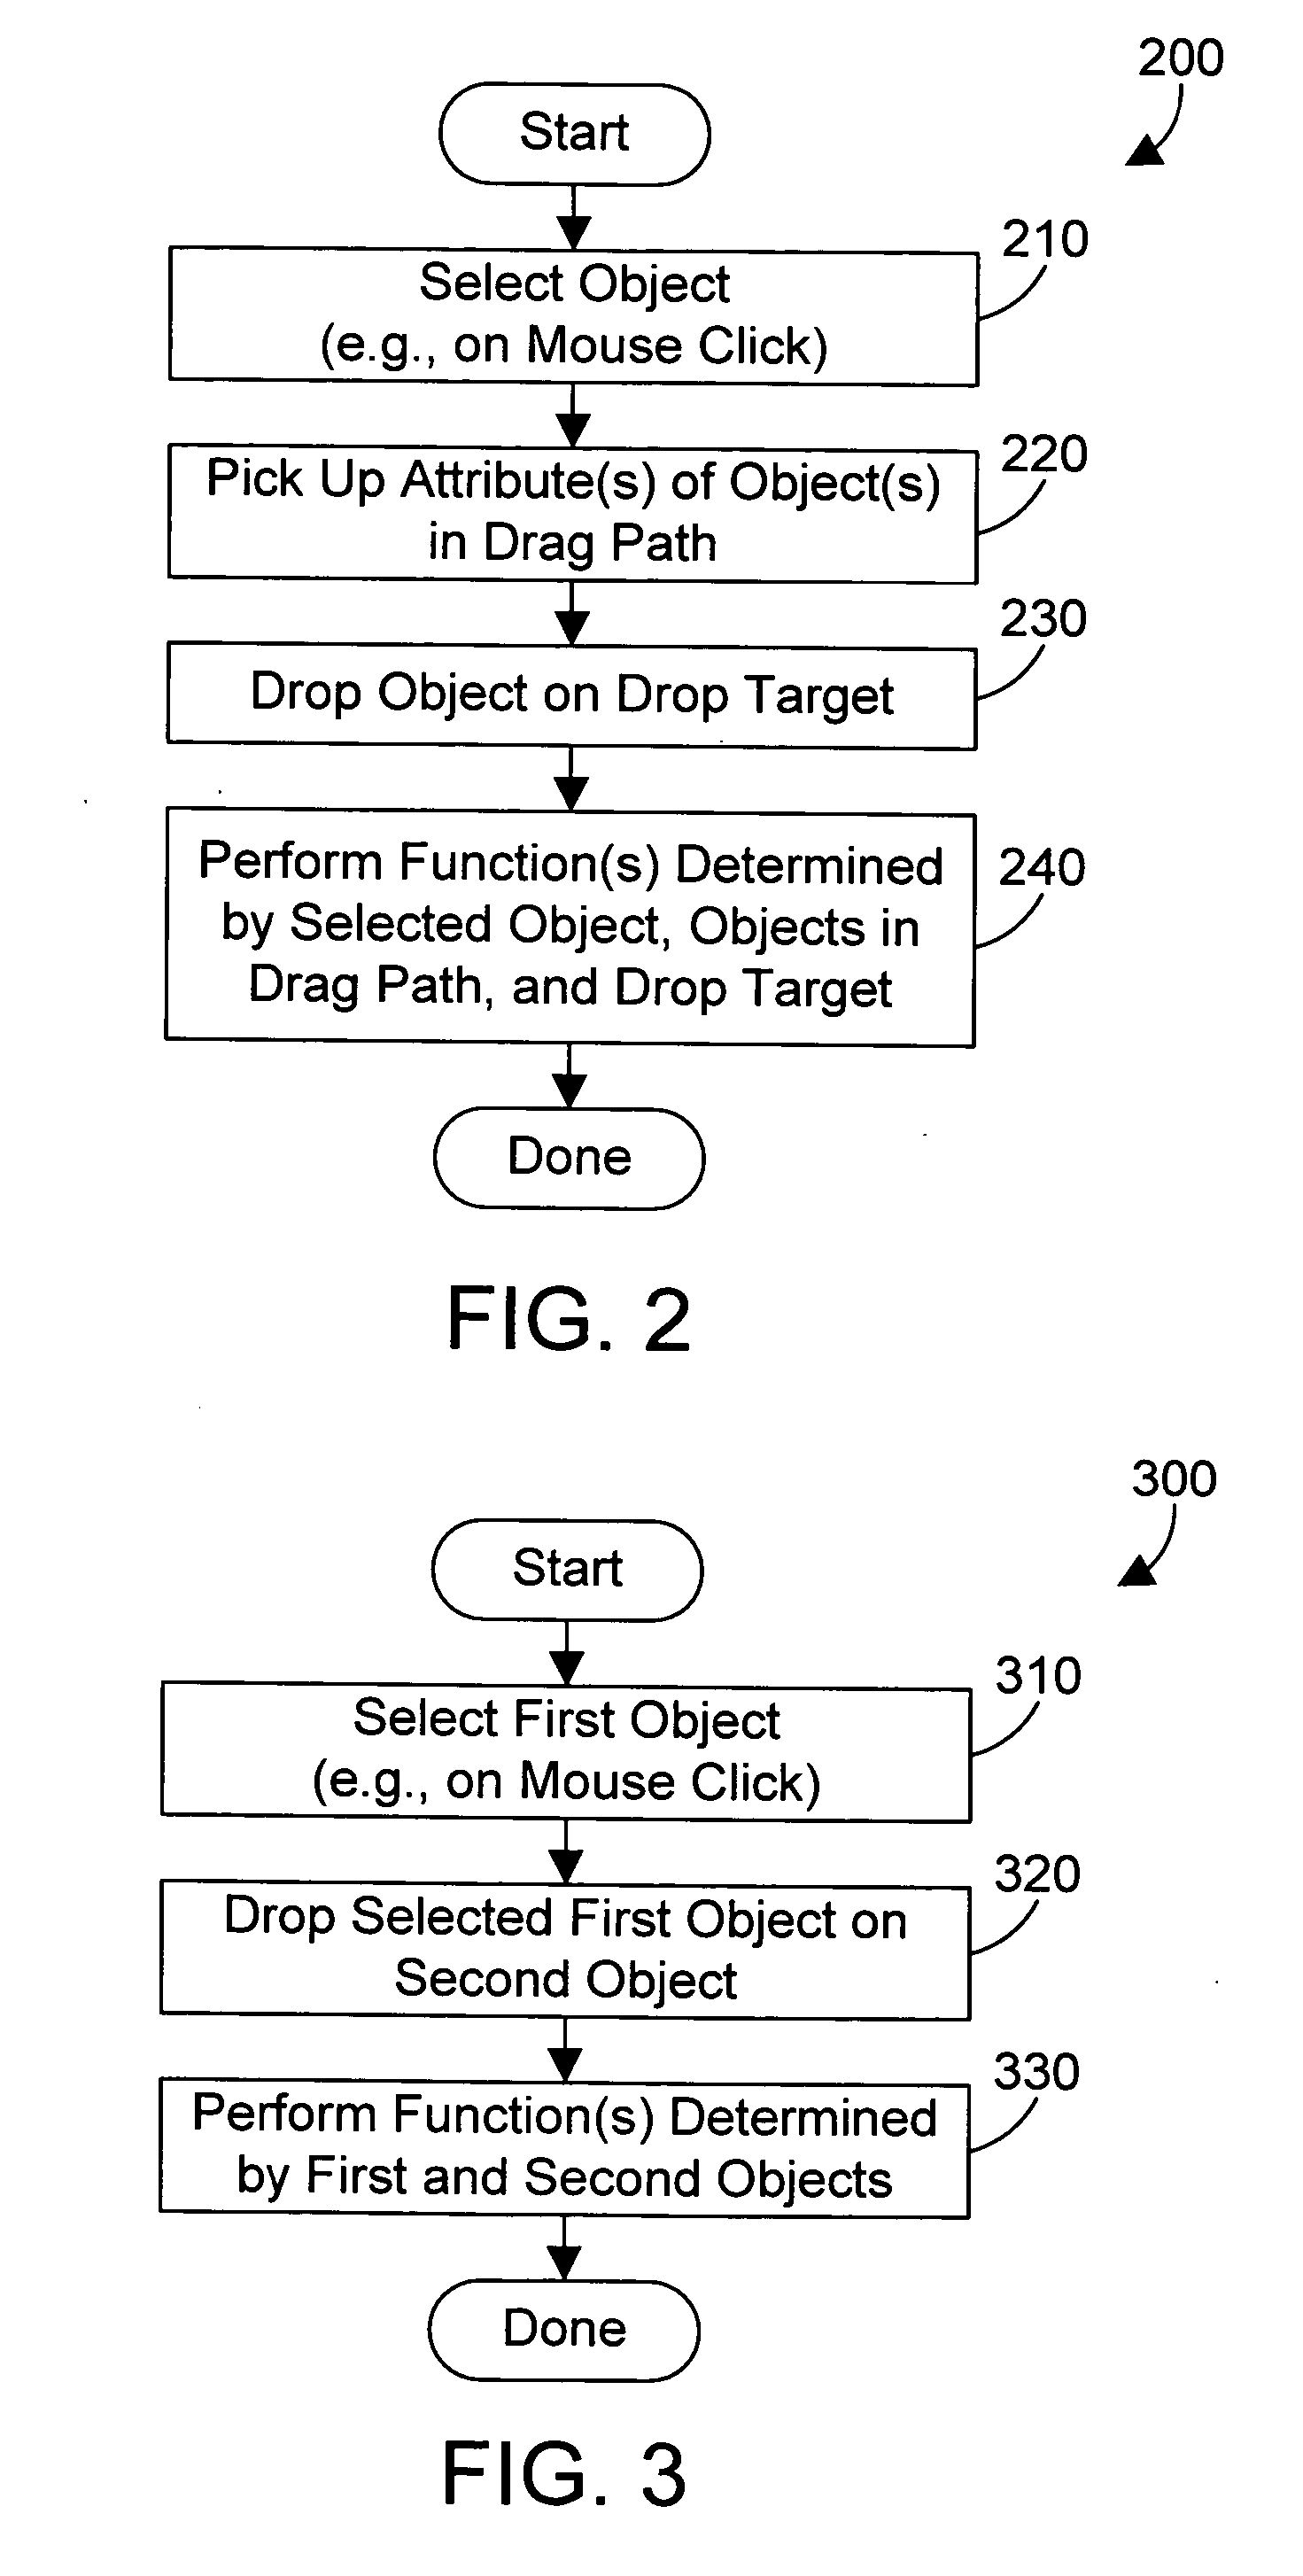 Apparatus and method for pointer drag path operations